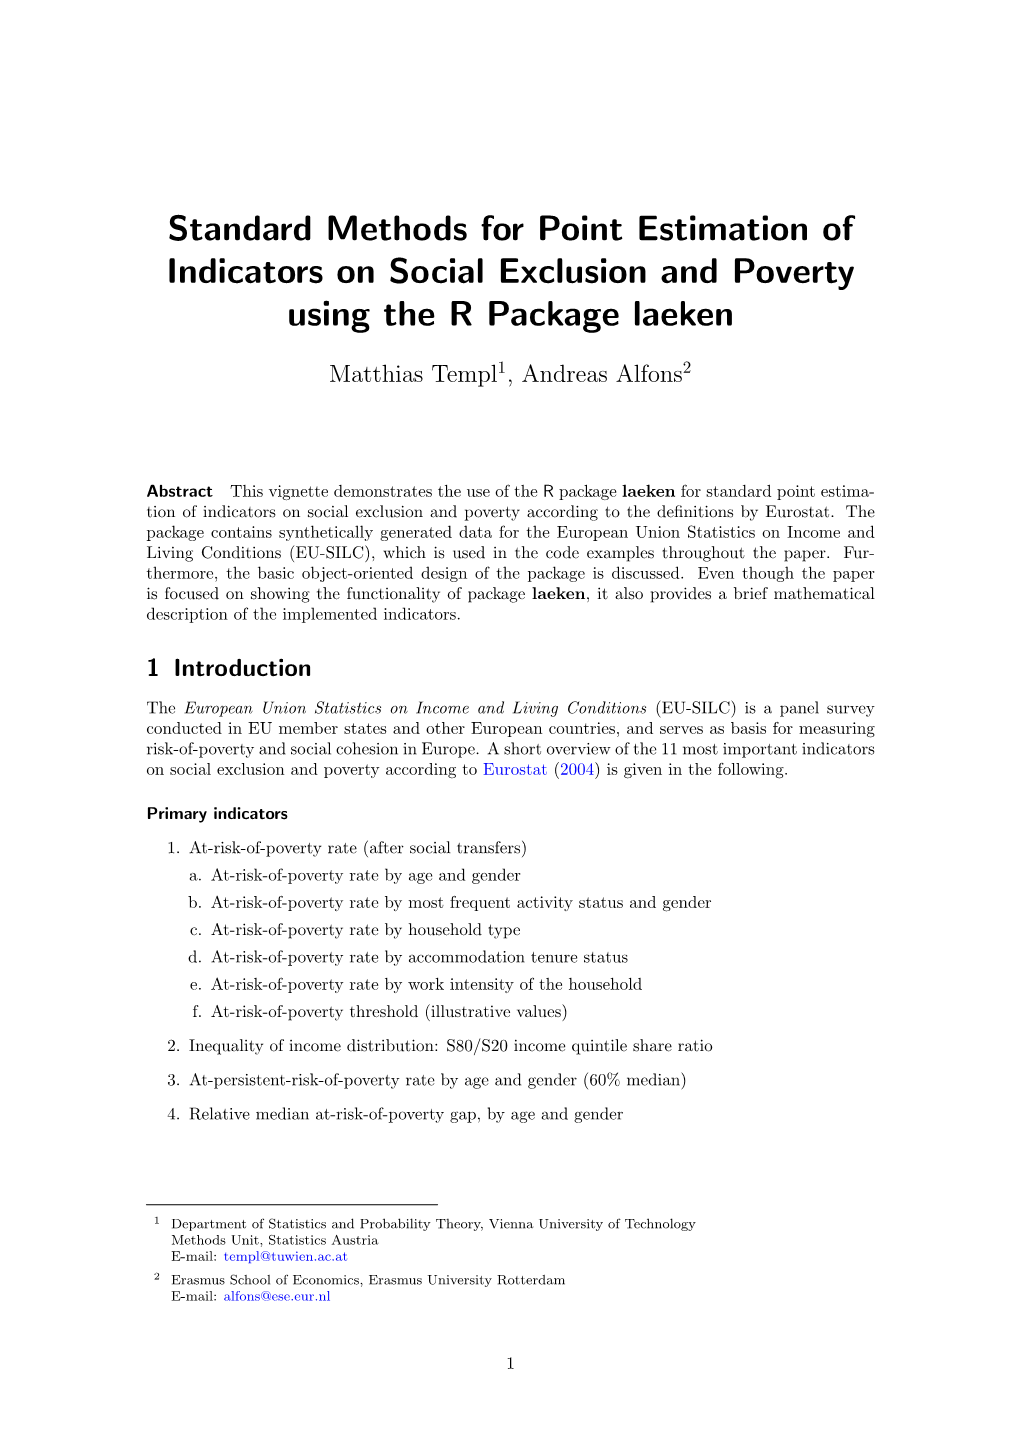 Standard Methods for Point Estimation of Indicators on Social Exclusion and Poverty Using the R Package Laeken